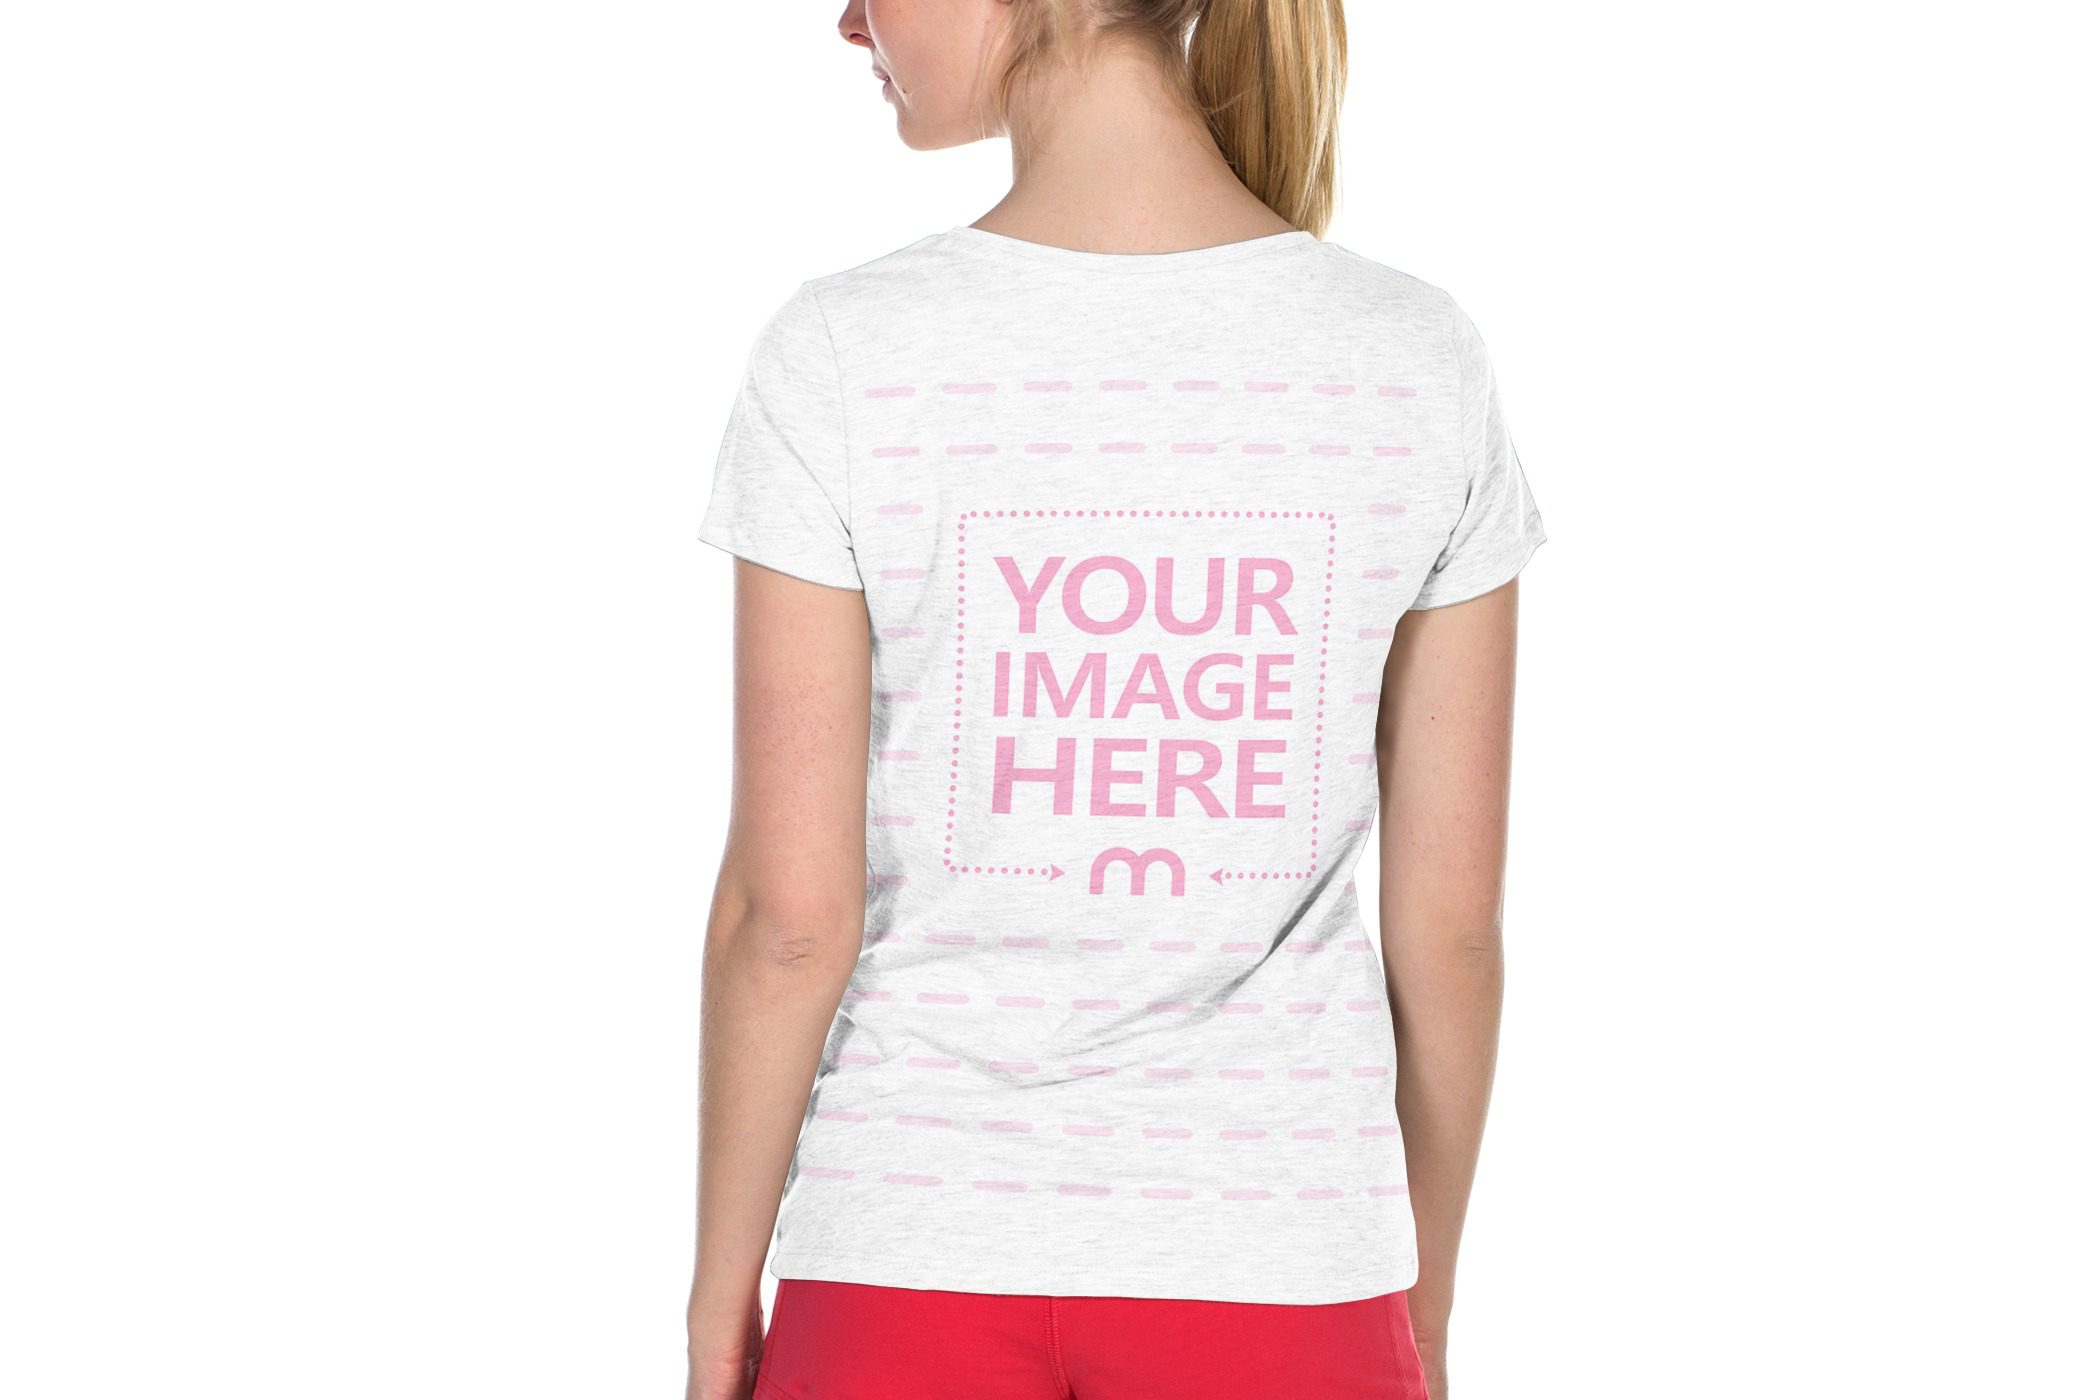 woman back view shirt template online mockup